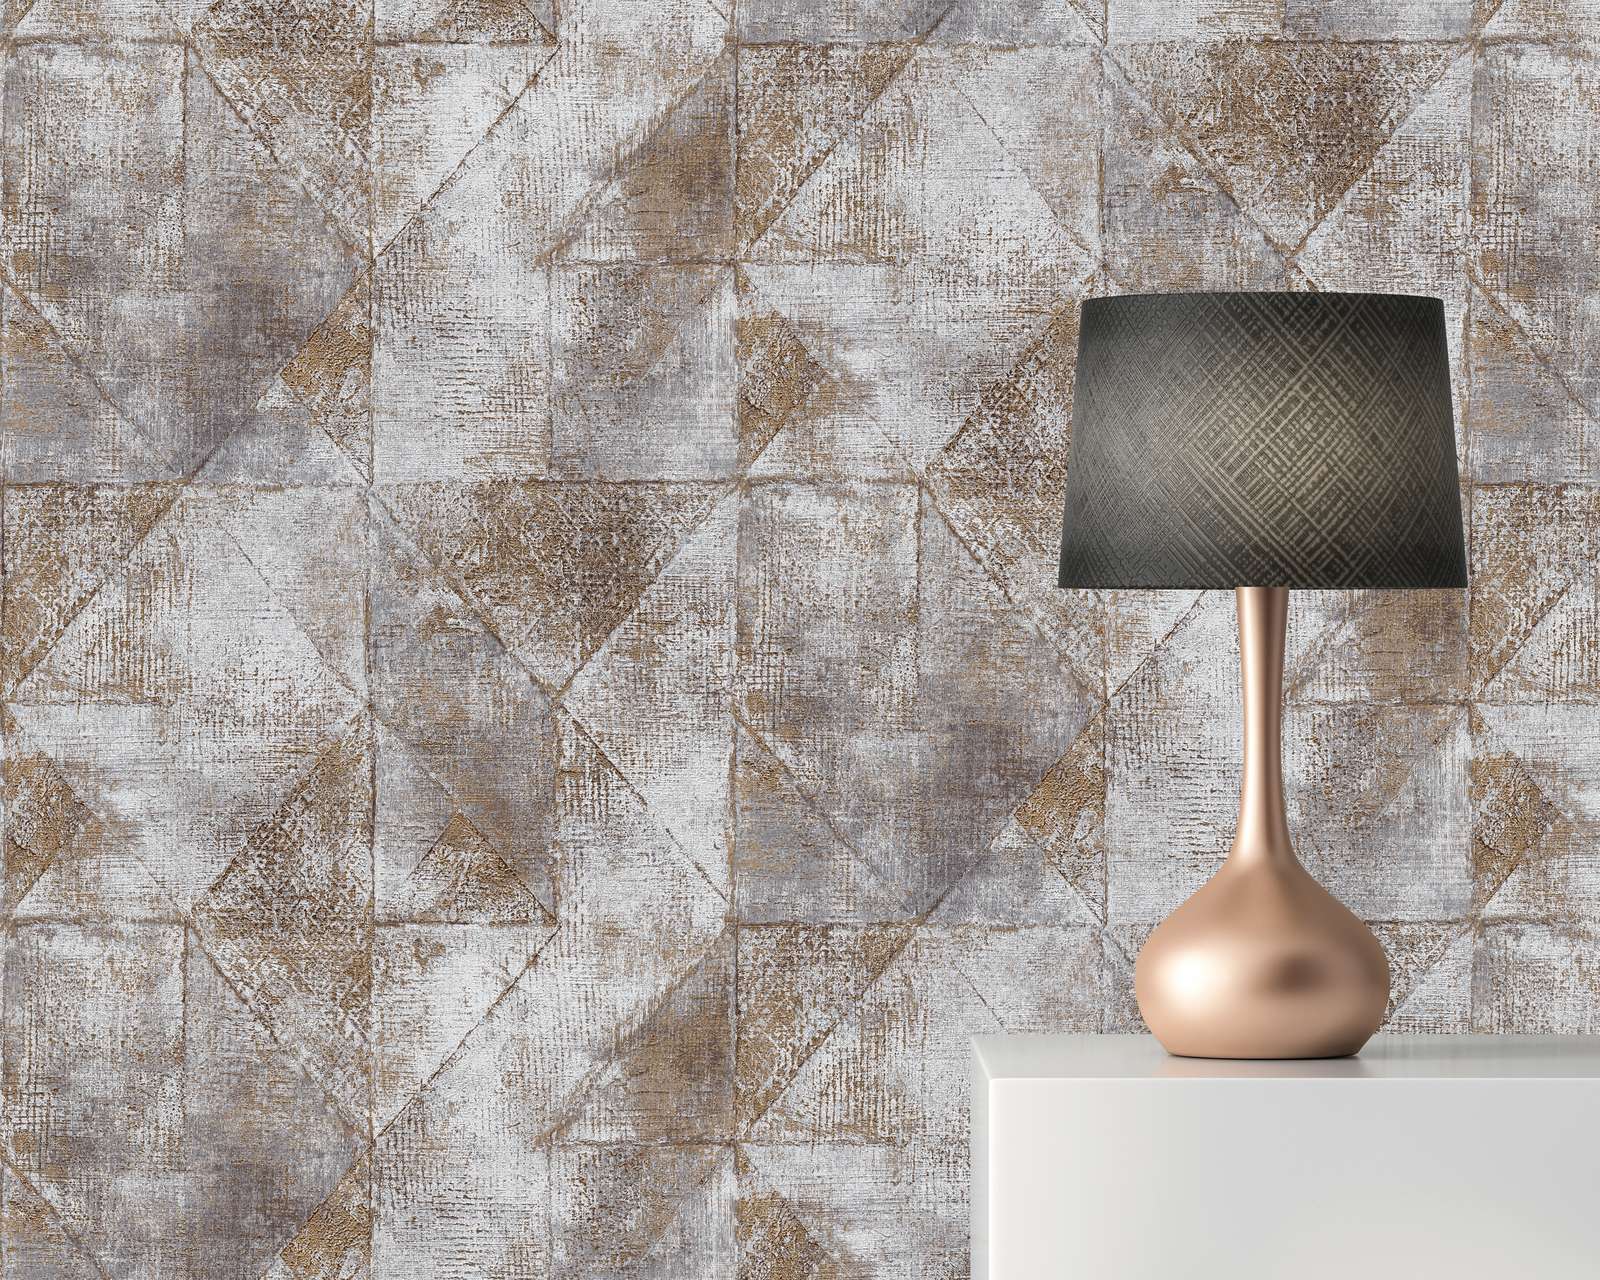             Graphic wallpaper with triangle pattern metallic glossy textured - gold, grey
        